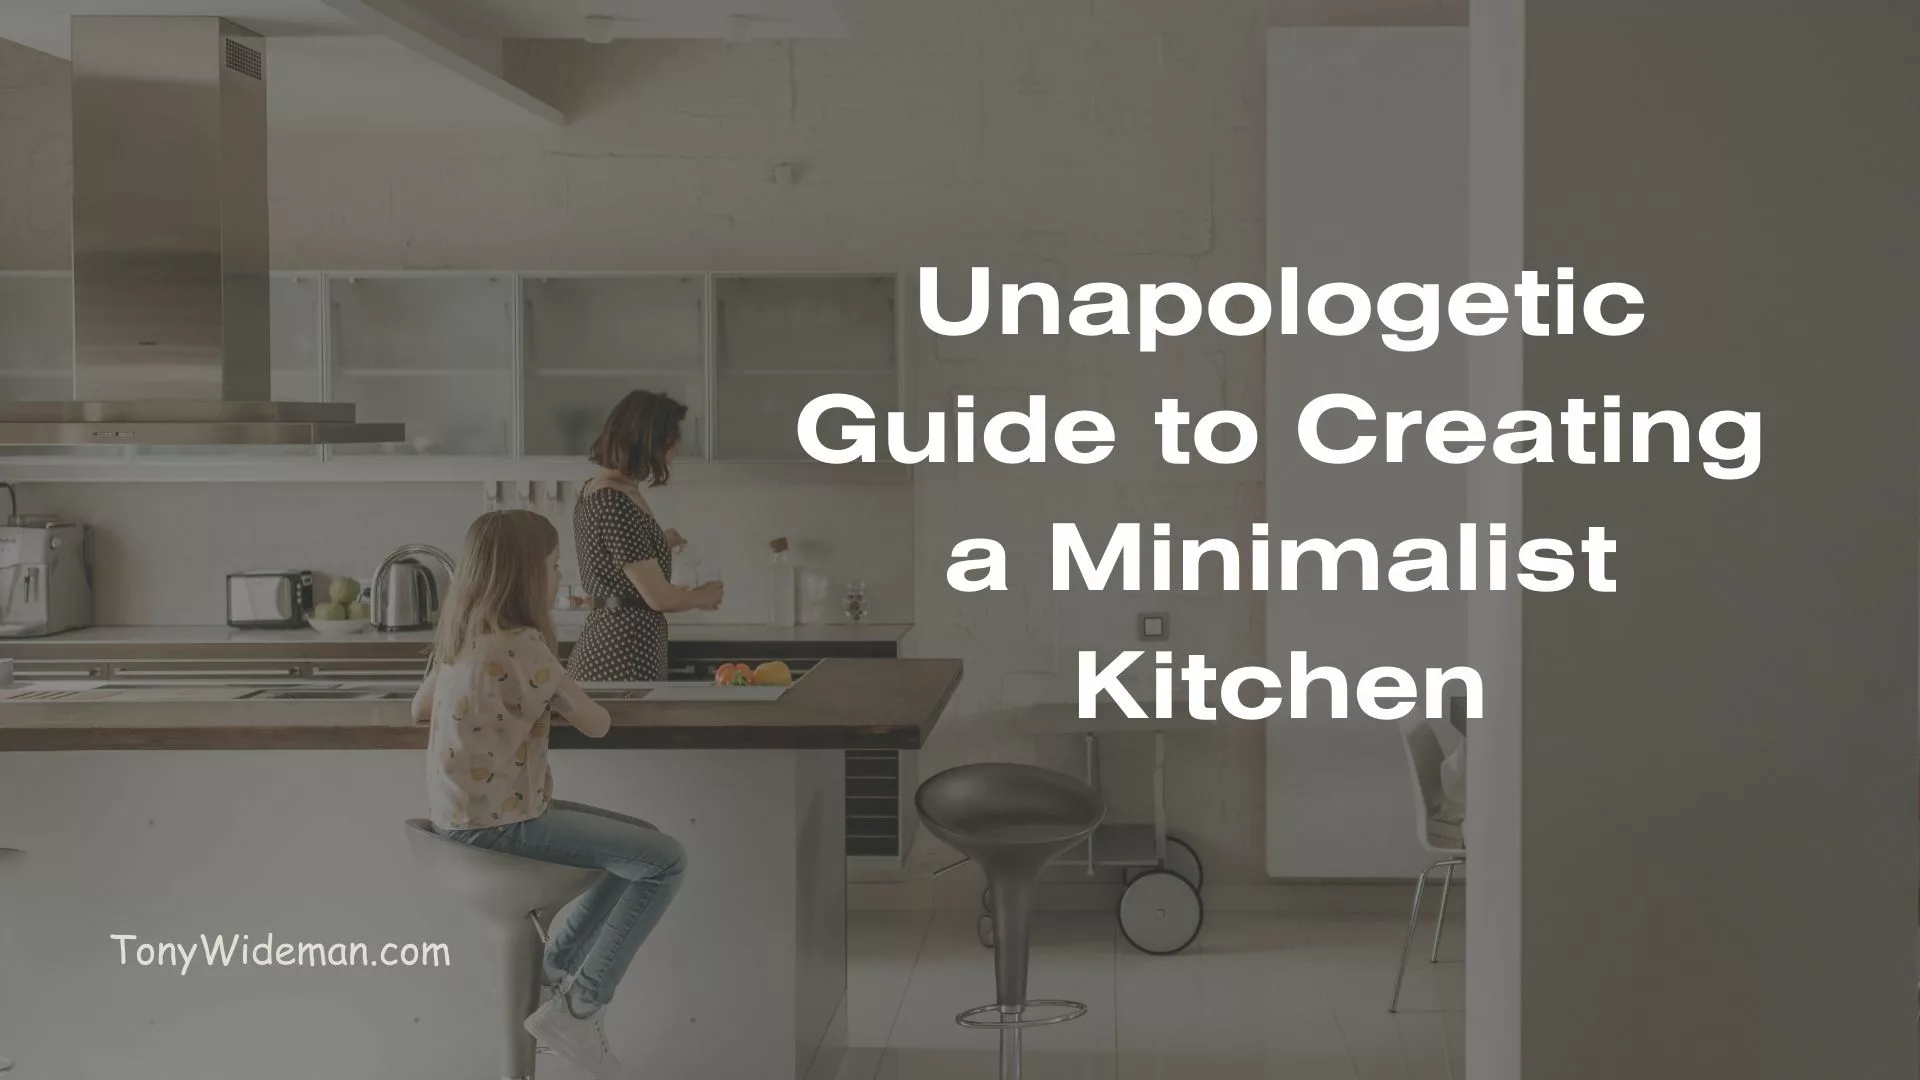 Unapologetic Guide to Creating a Minimalist Kitchen